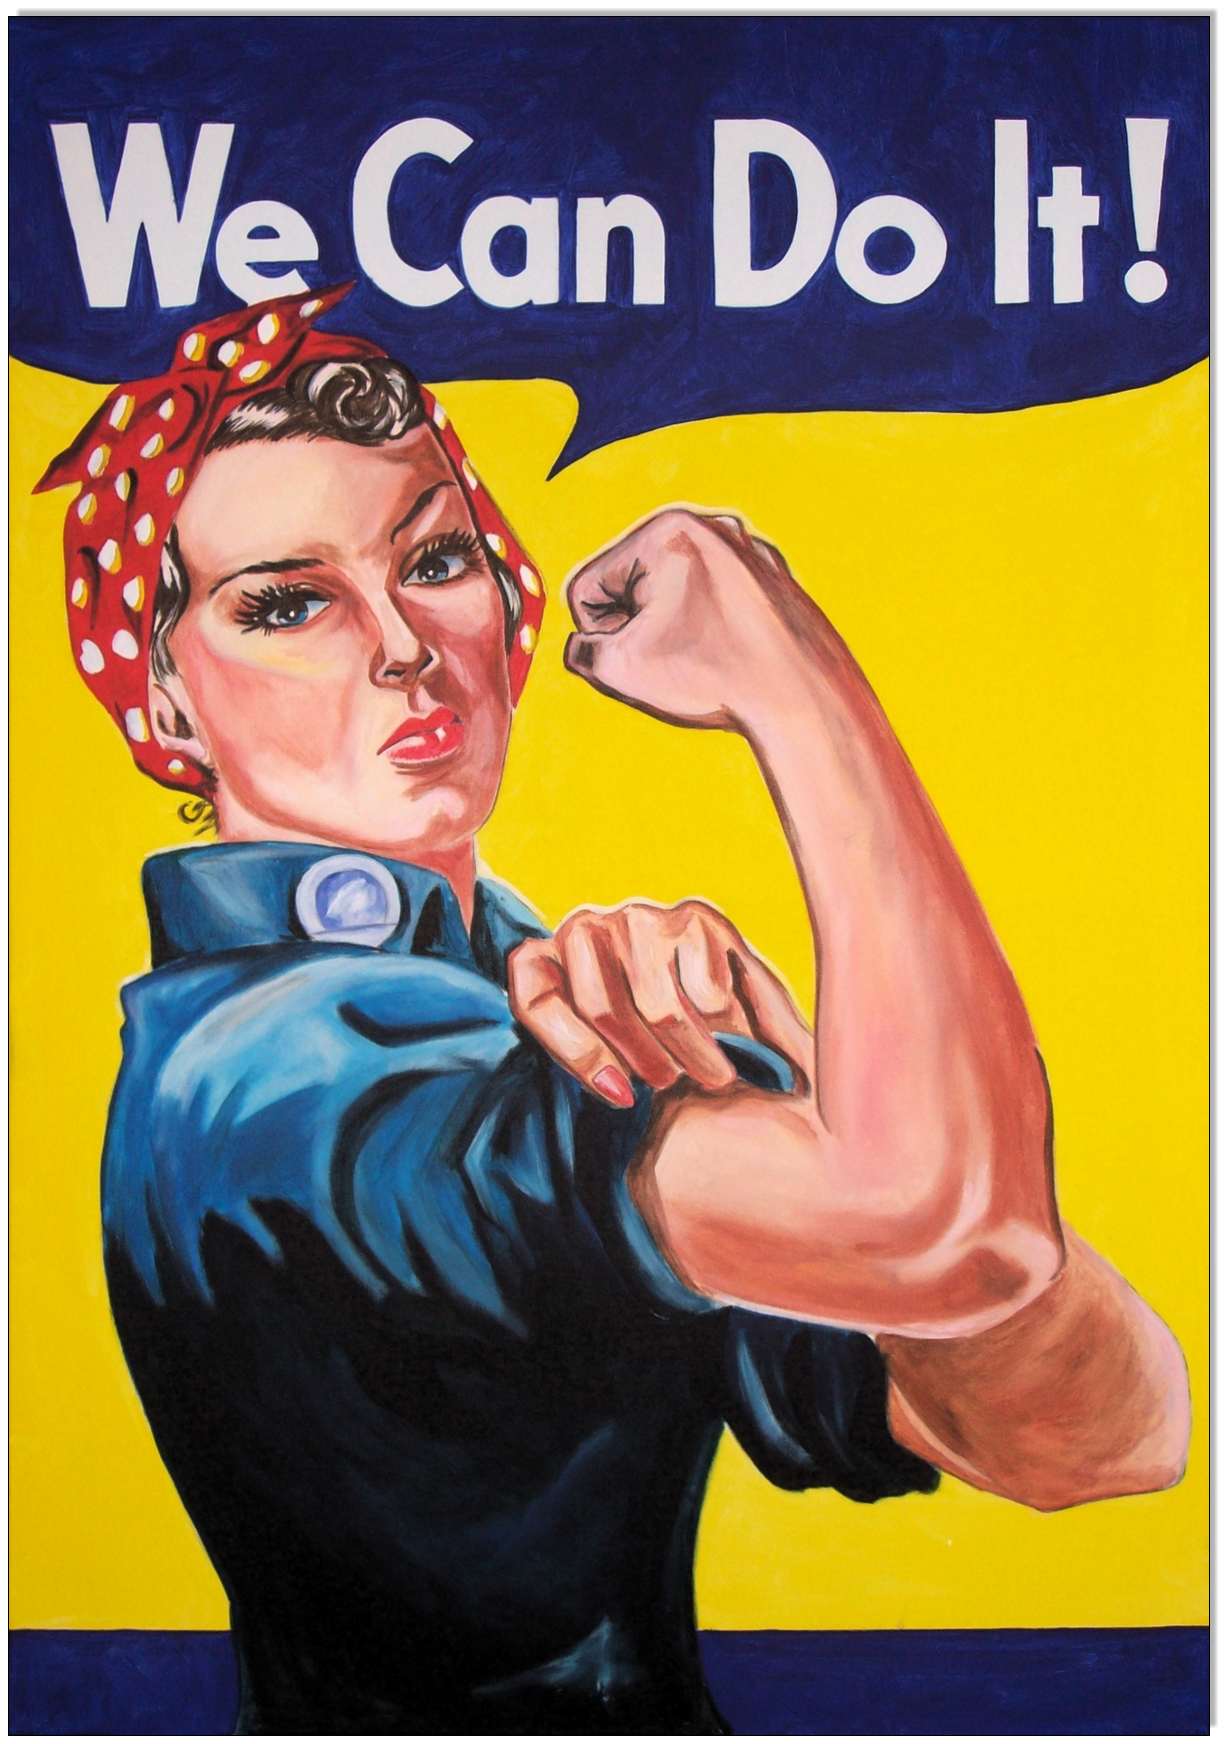 We can do it - 70 x 100 cm